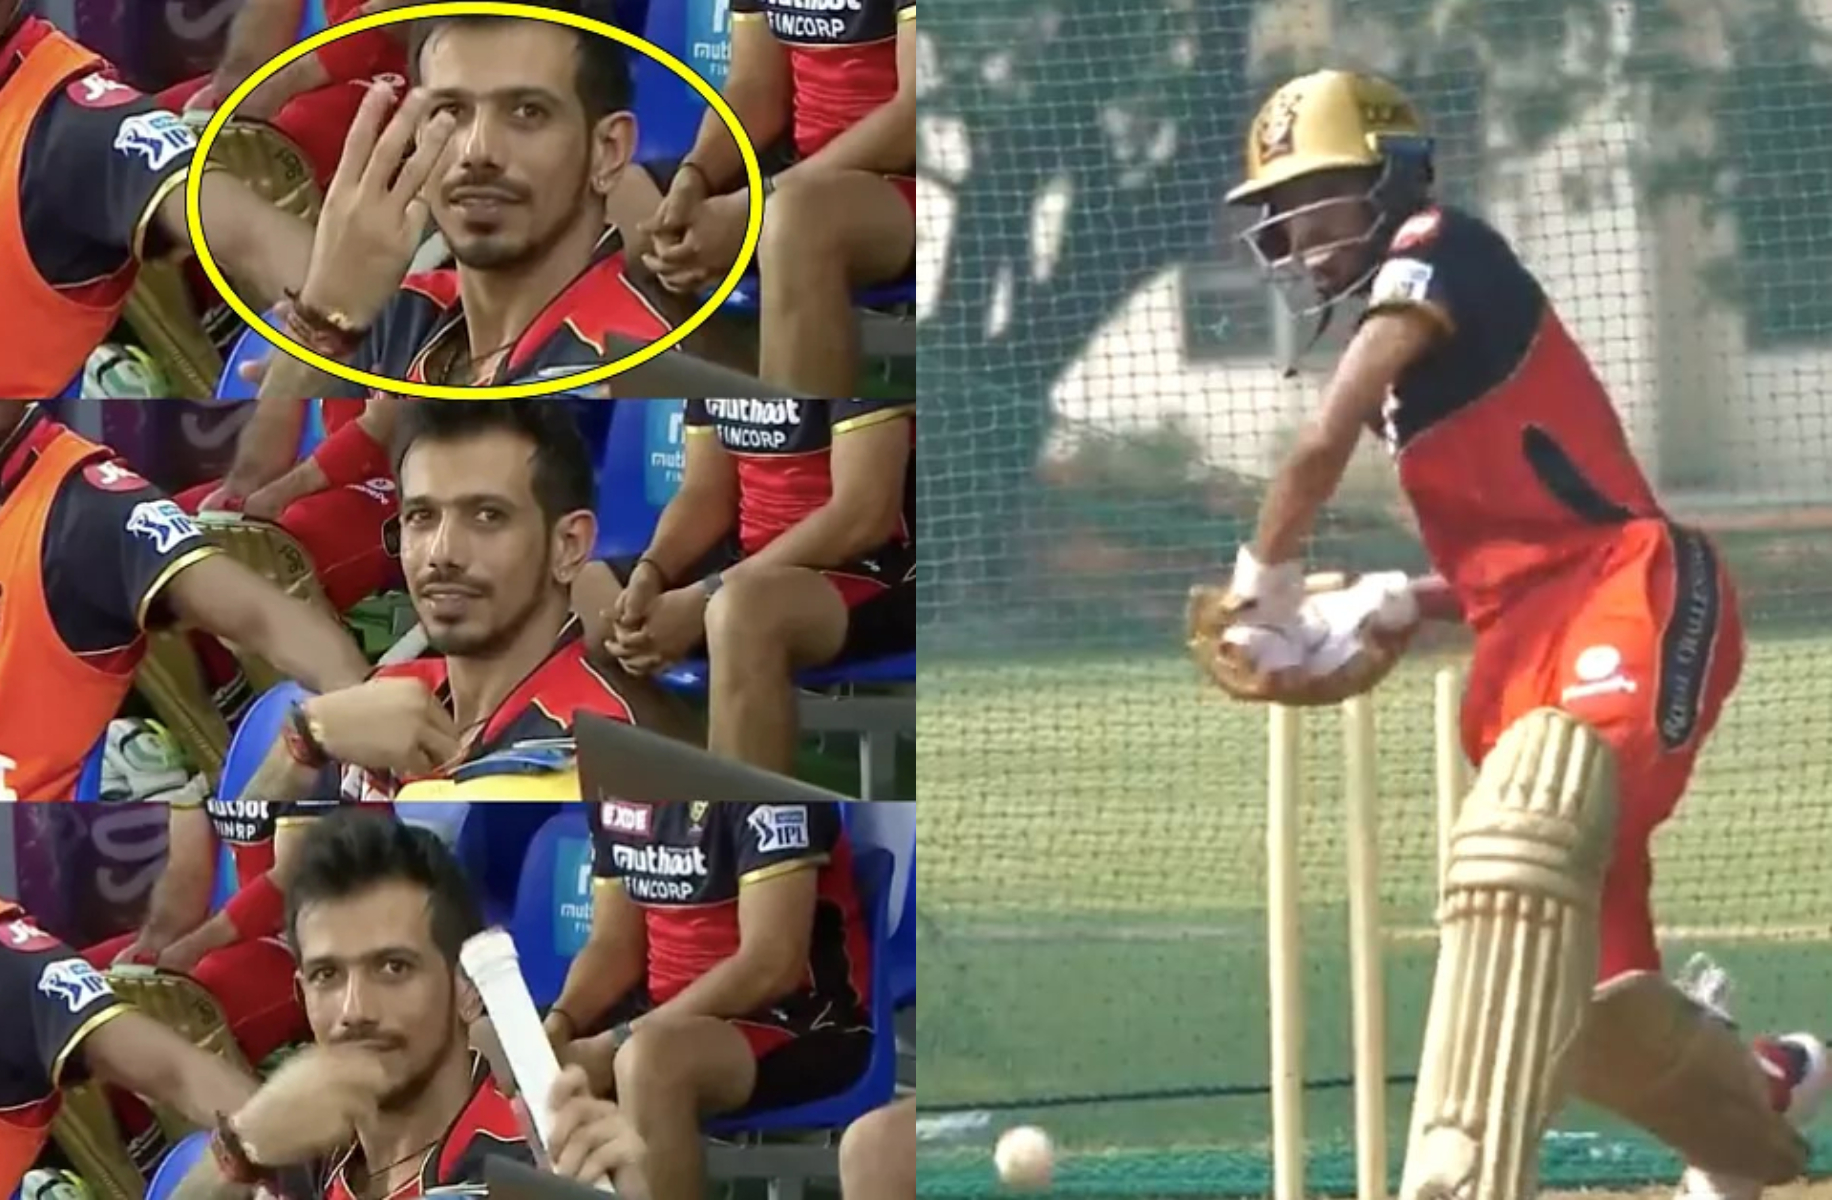 Yuzvendra Chahal prepares to realize his dream of batting at no.3 for RCB | Twitter